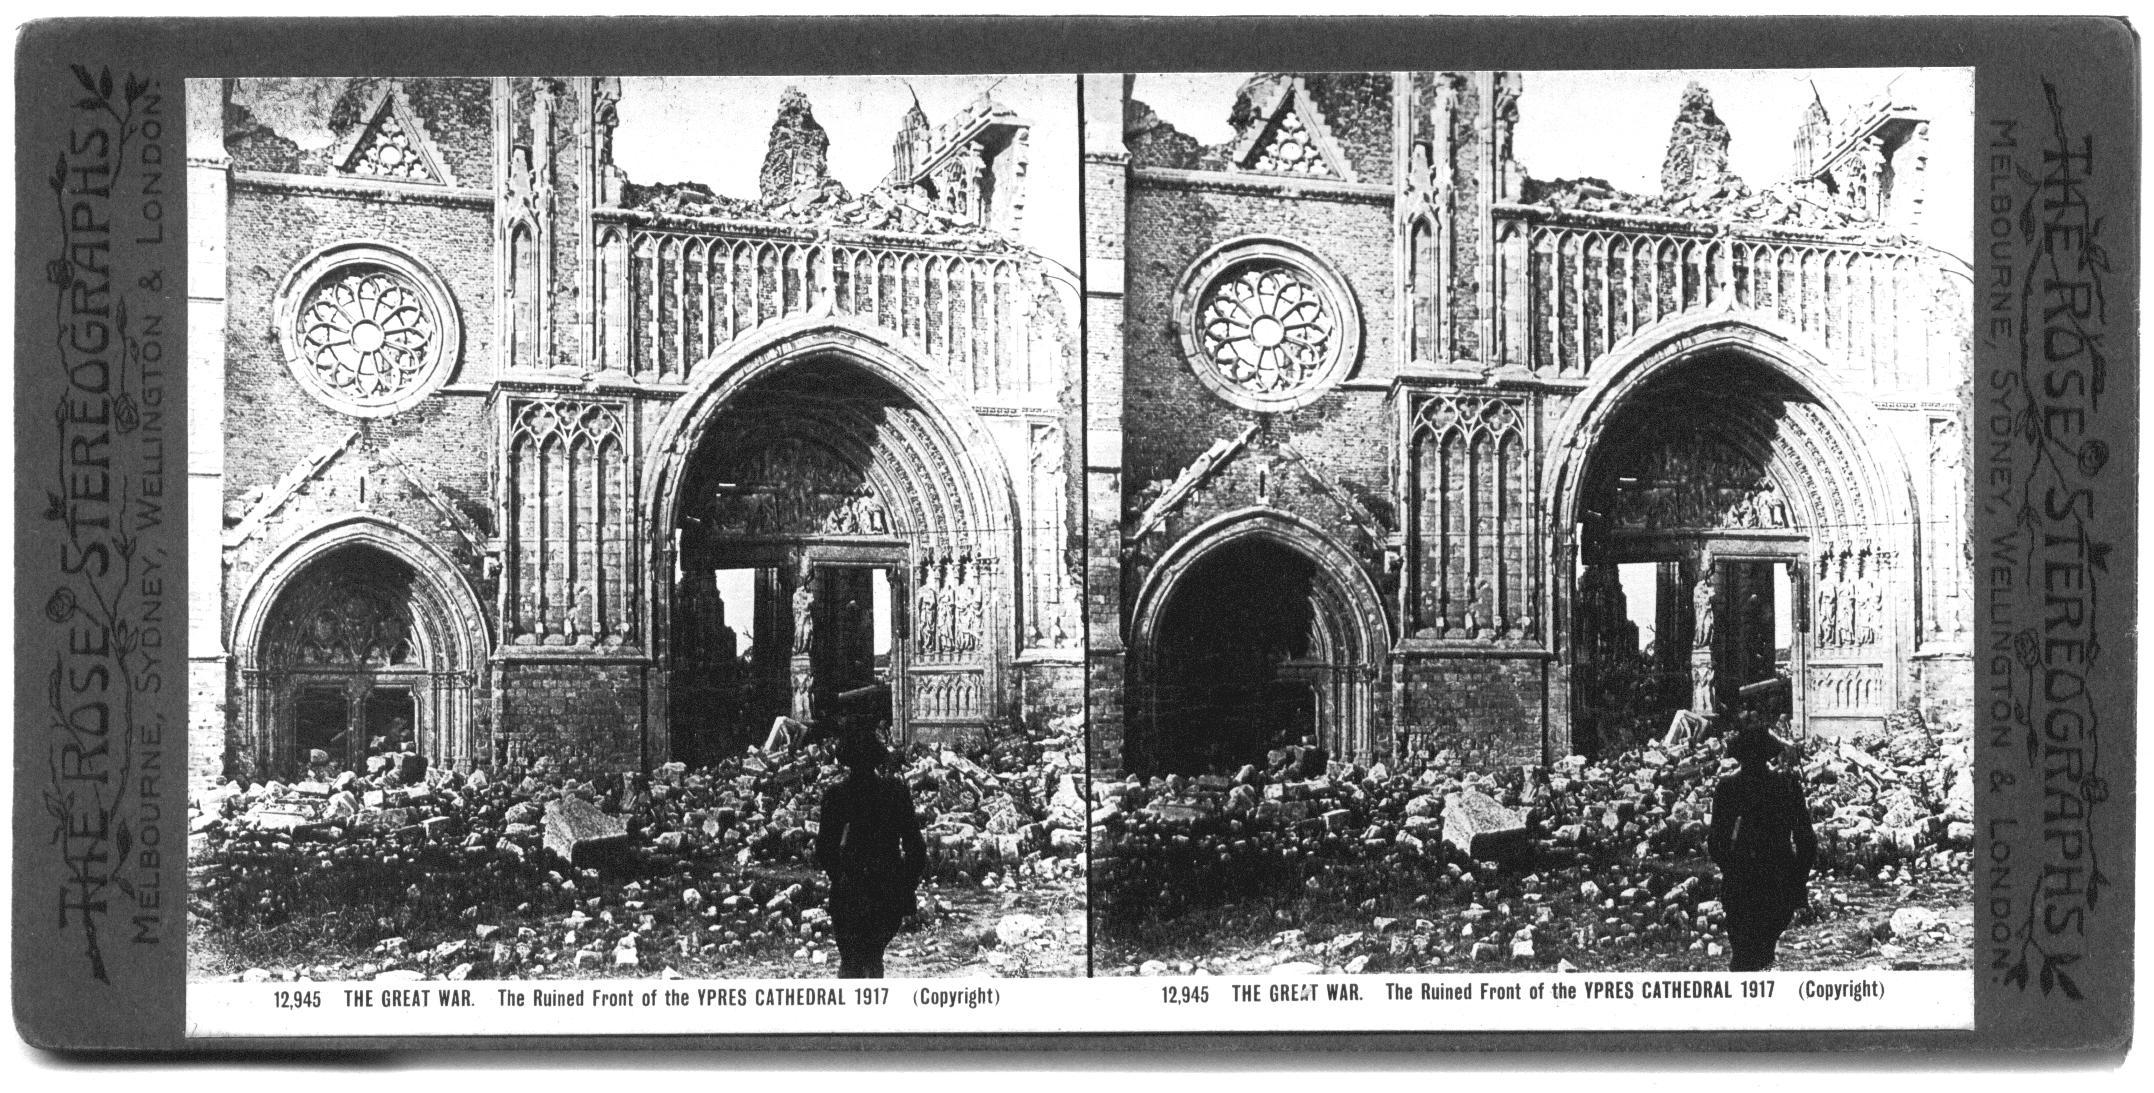 THE GREAT WAR. The Ruined Front of the YPRES CATHEDRAL 1917.